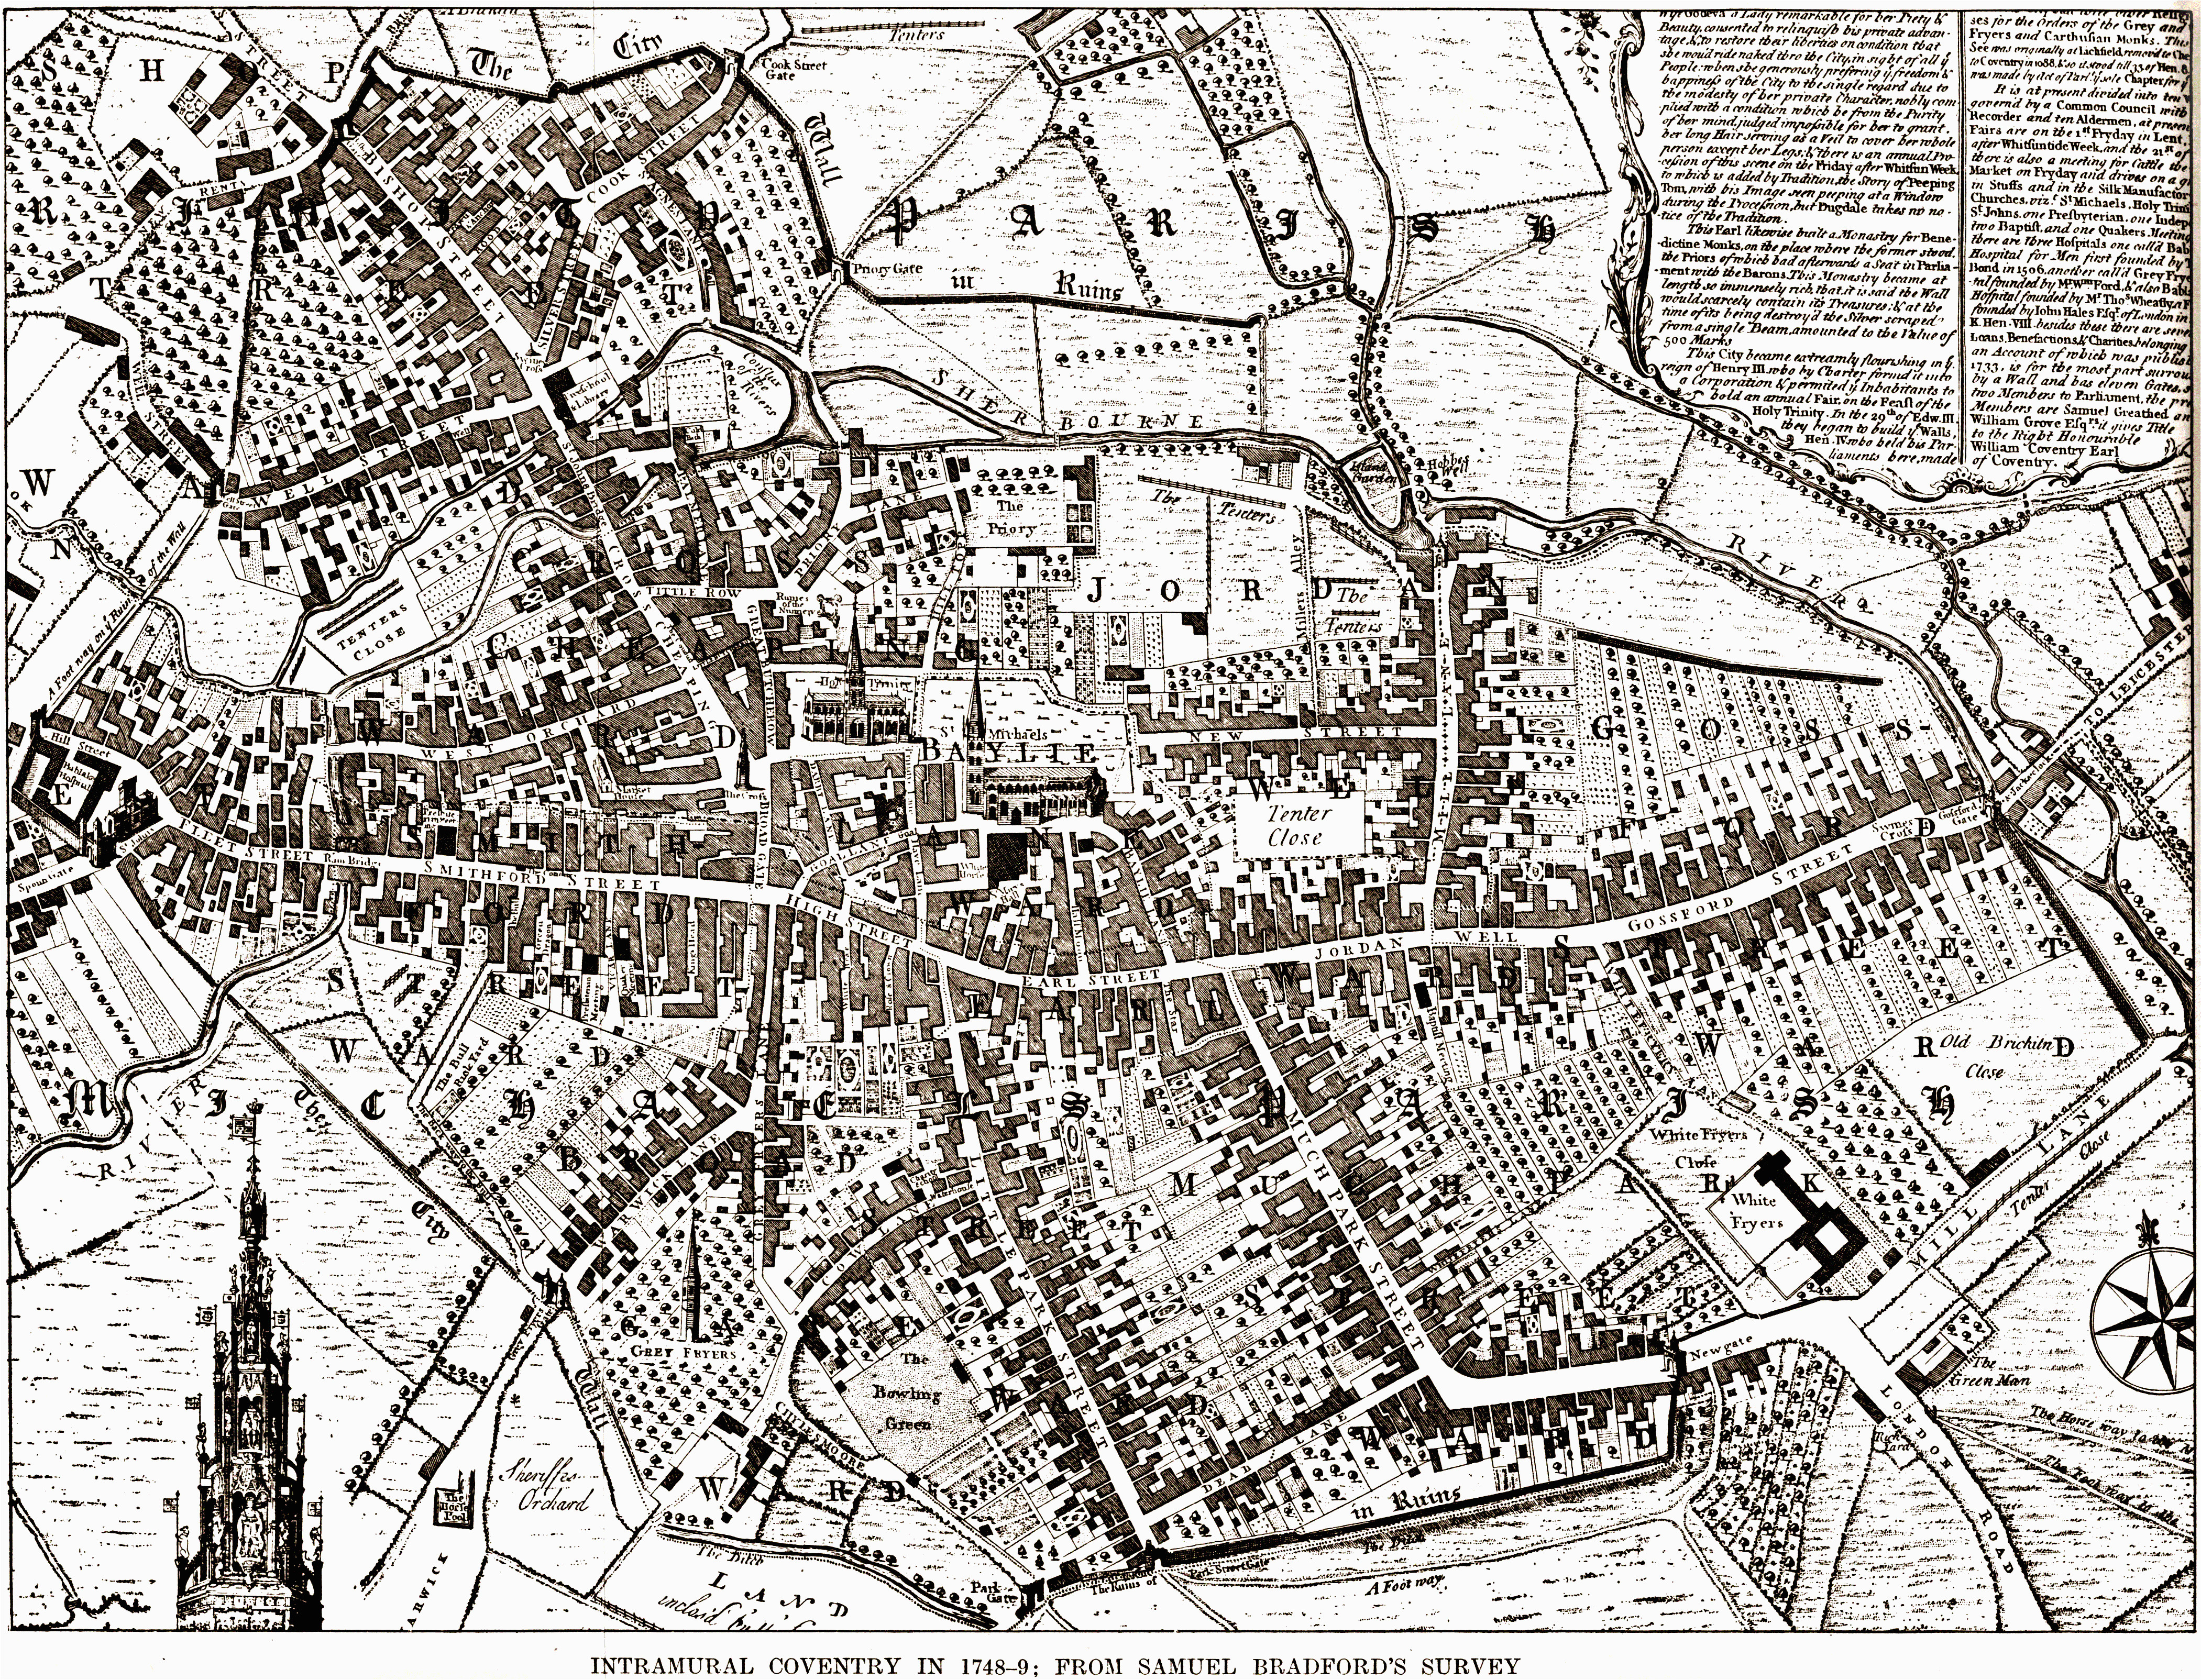 coventry is still medieval in 1749 without any industrial